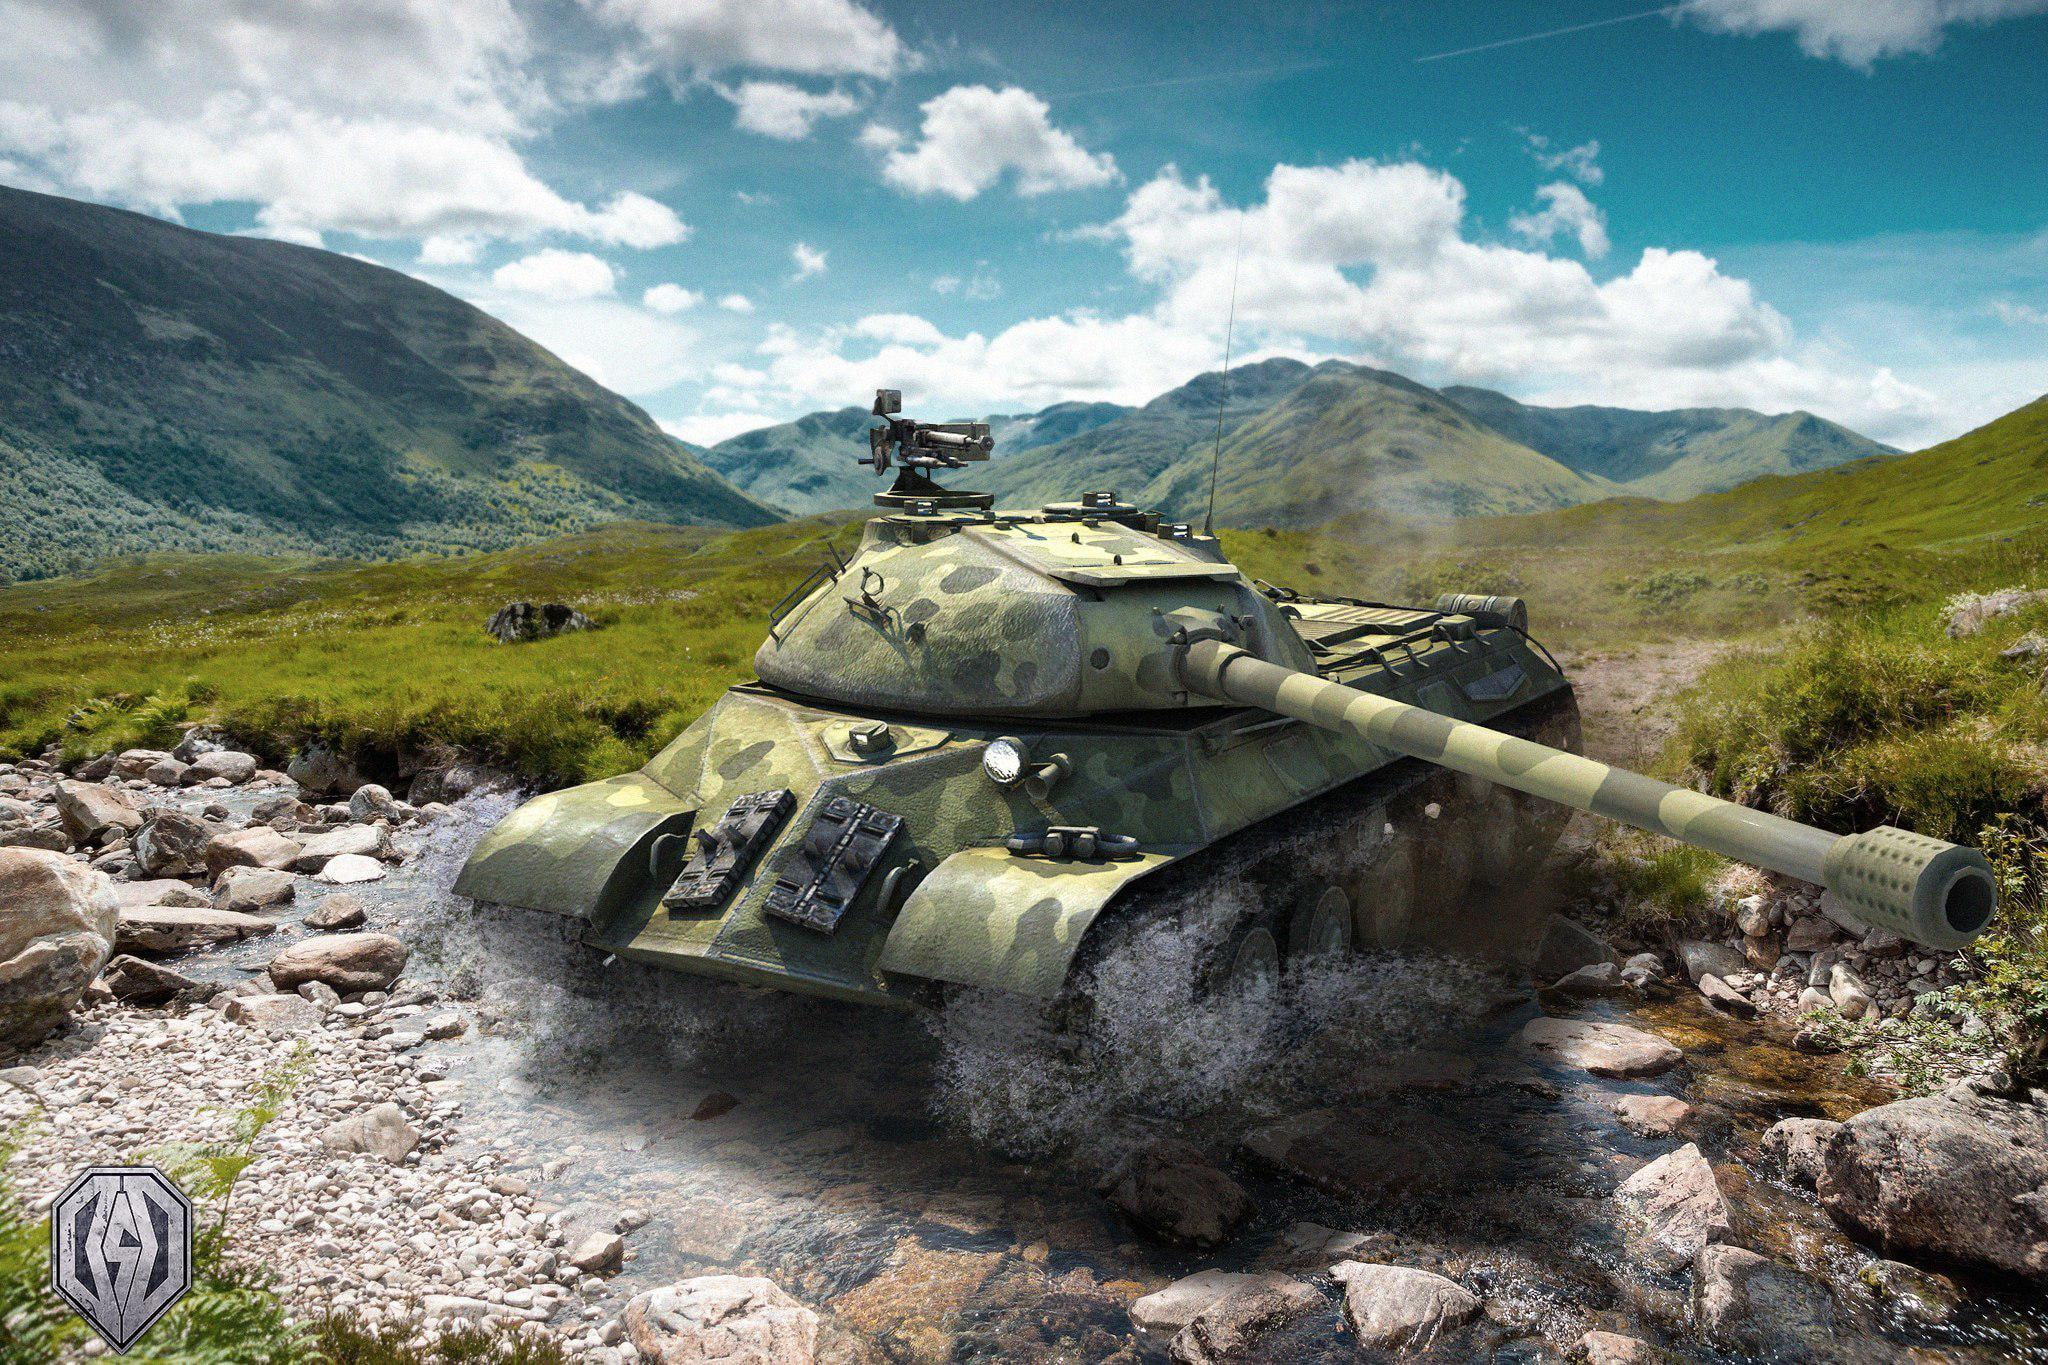 World of Tanks Tanks IS-3 Games 3D Graphics, tanks from games